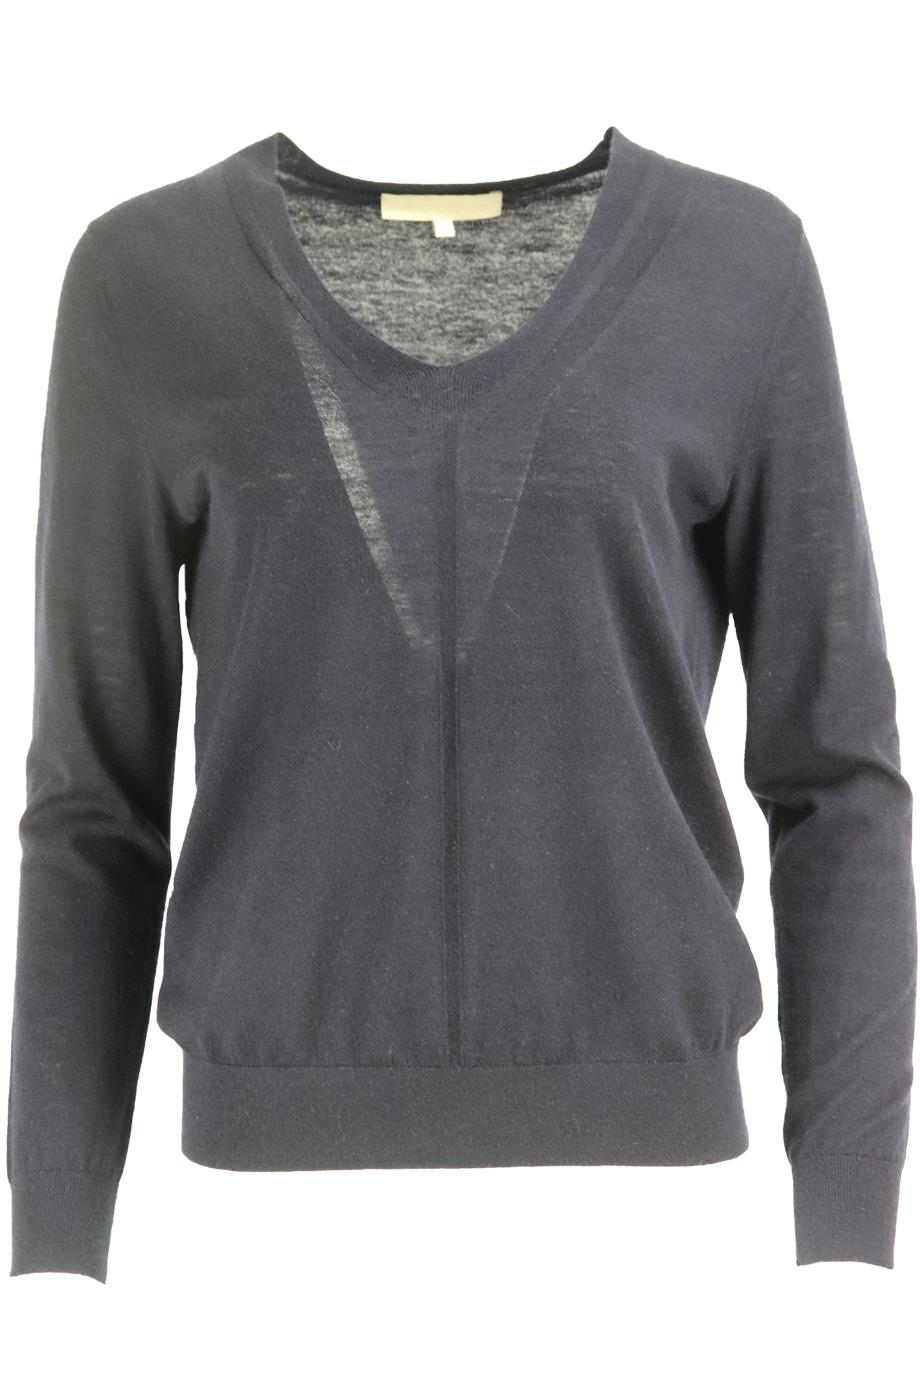 VANESSA BRUNO WOOL AND CASHMERE SWEATER SMALL